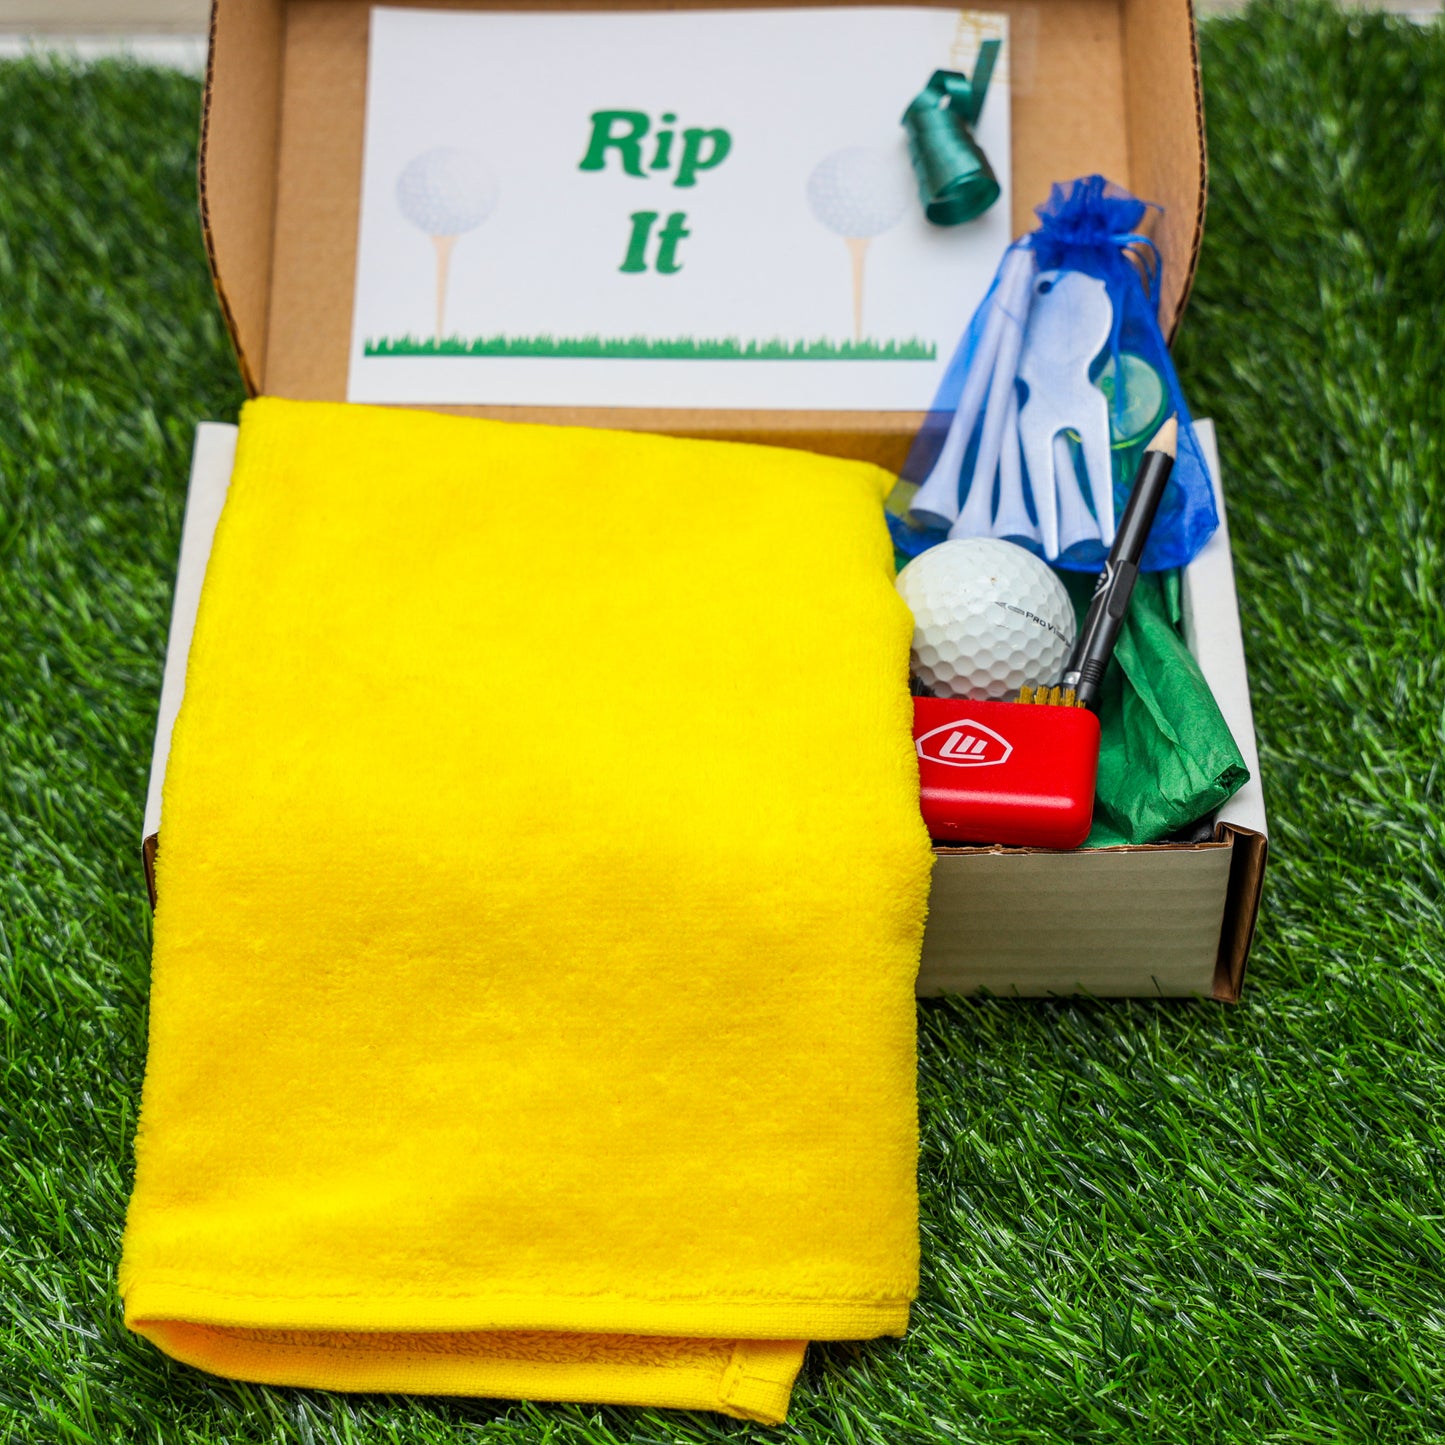 Personalised Tri Fold Golf Towel with Name Golfing Gift Box  - Always Looking Good - Yellow Towel  